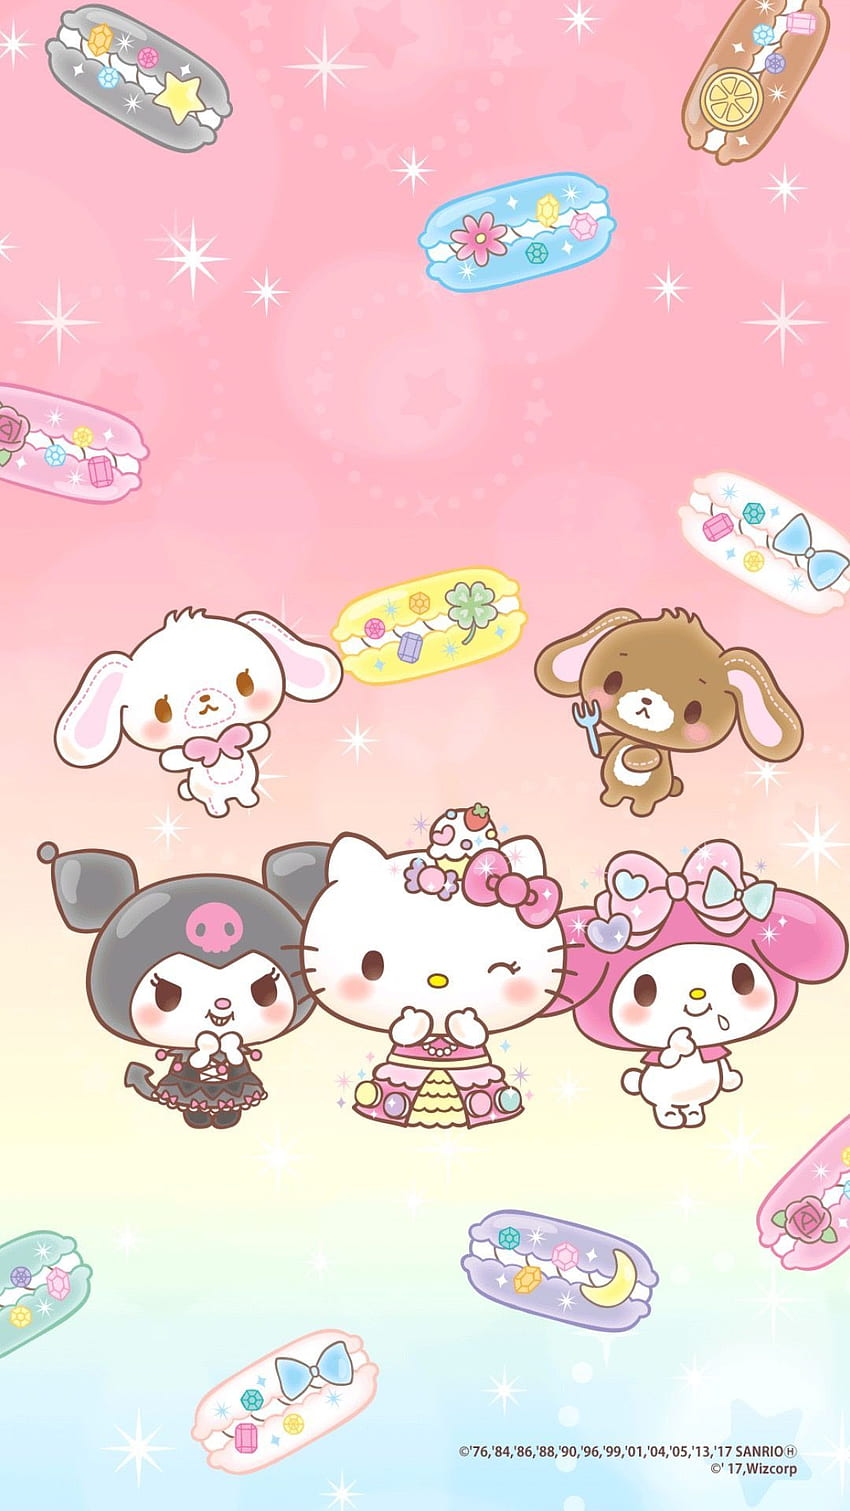 Hello Kitty and Friends Wallpaper by CKittyCosmos on DeviantArt